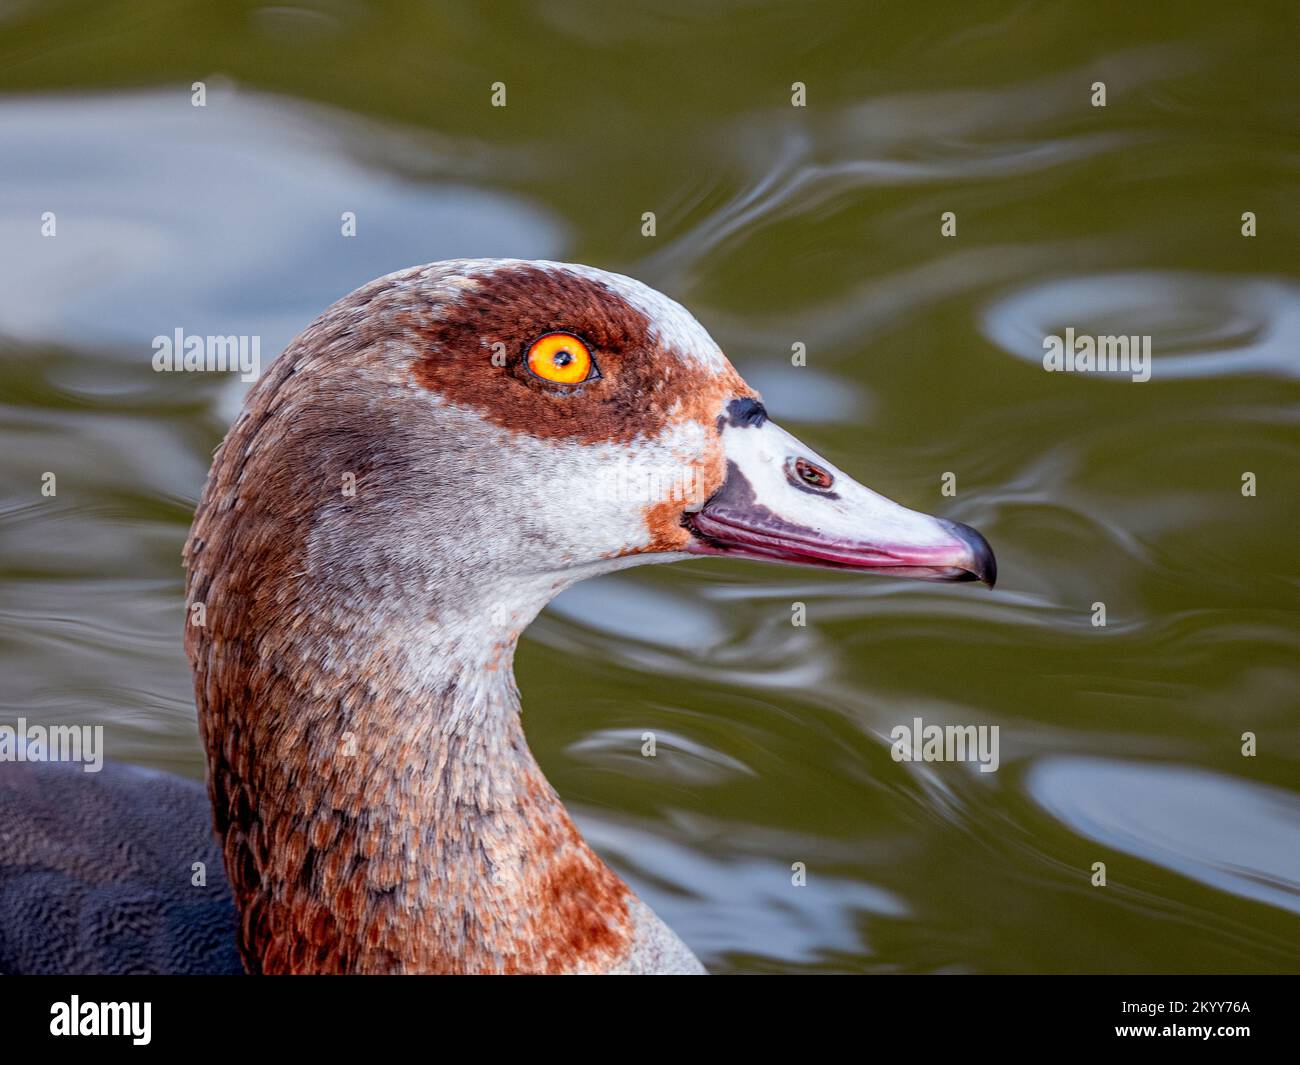 The bright yellow eye of the Egyptian Goose Stock Photo